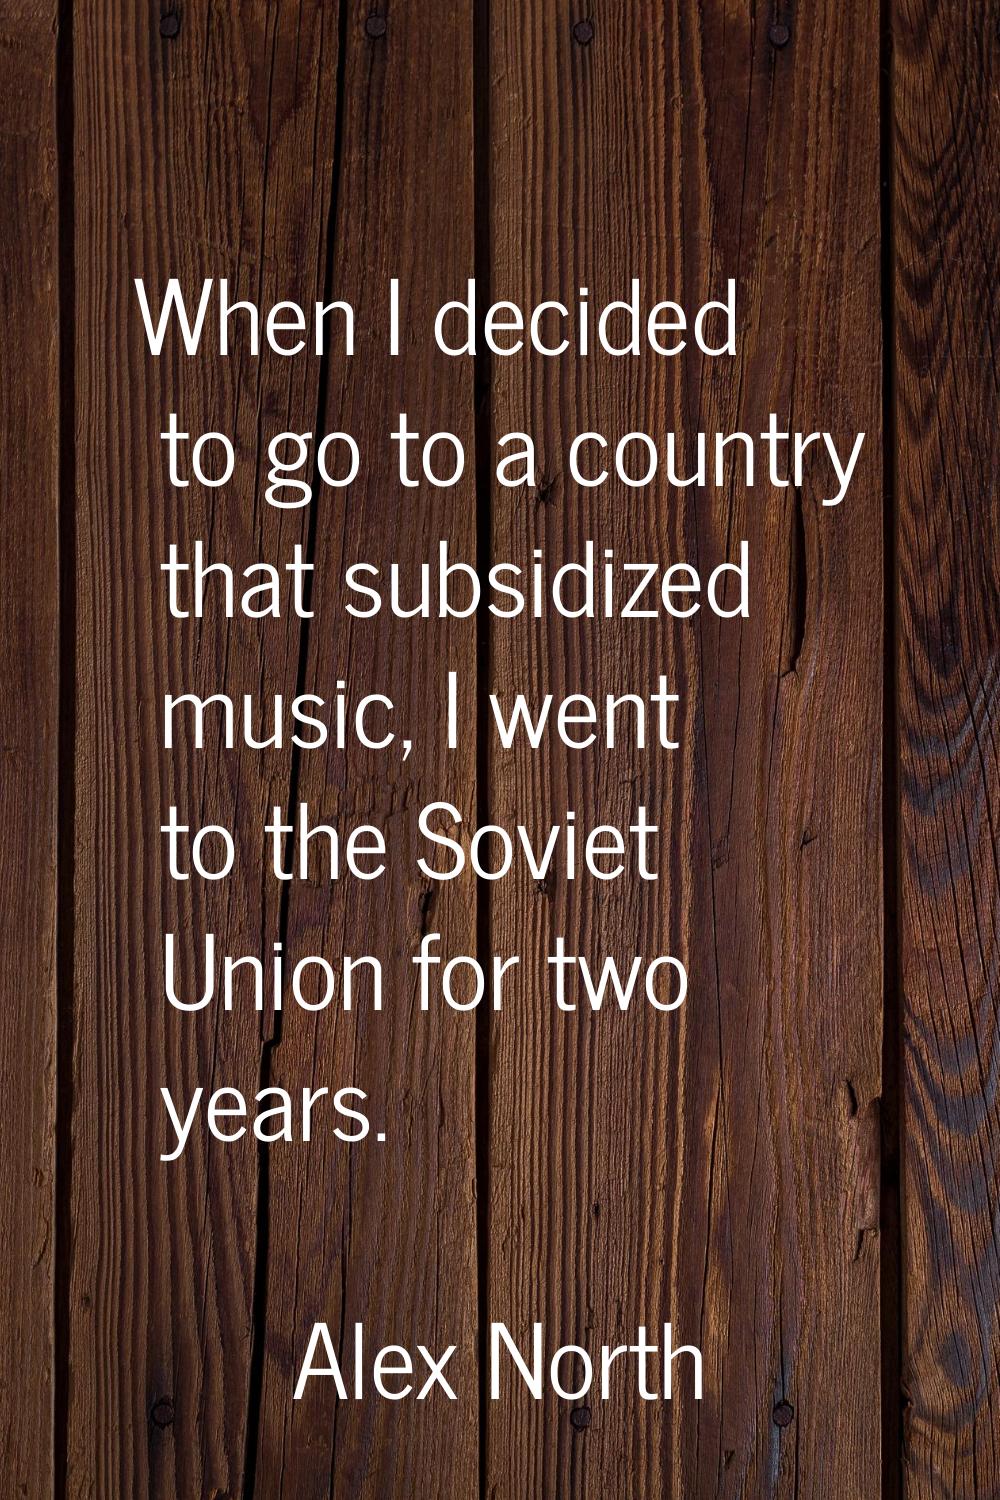 When I decided to go to a country that subsidized music, I went to the Soviet Union for two years.